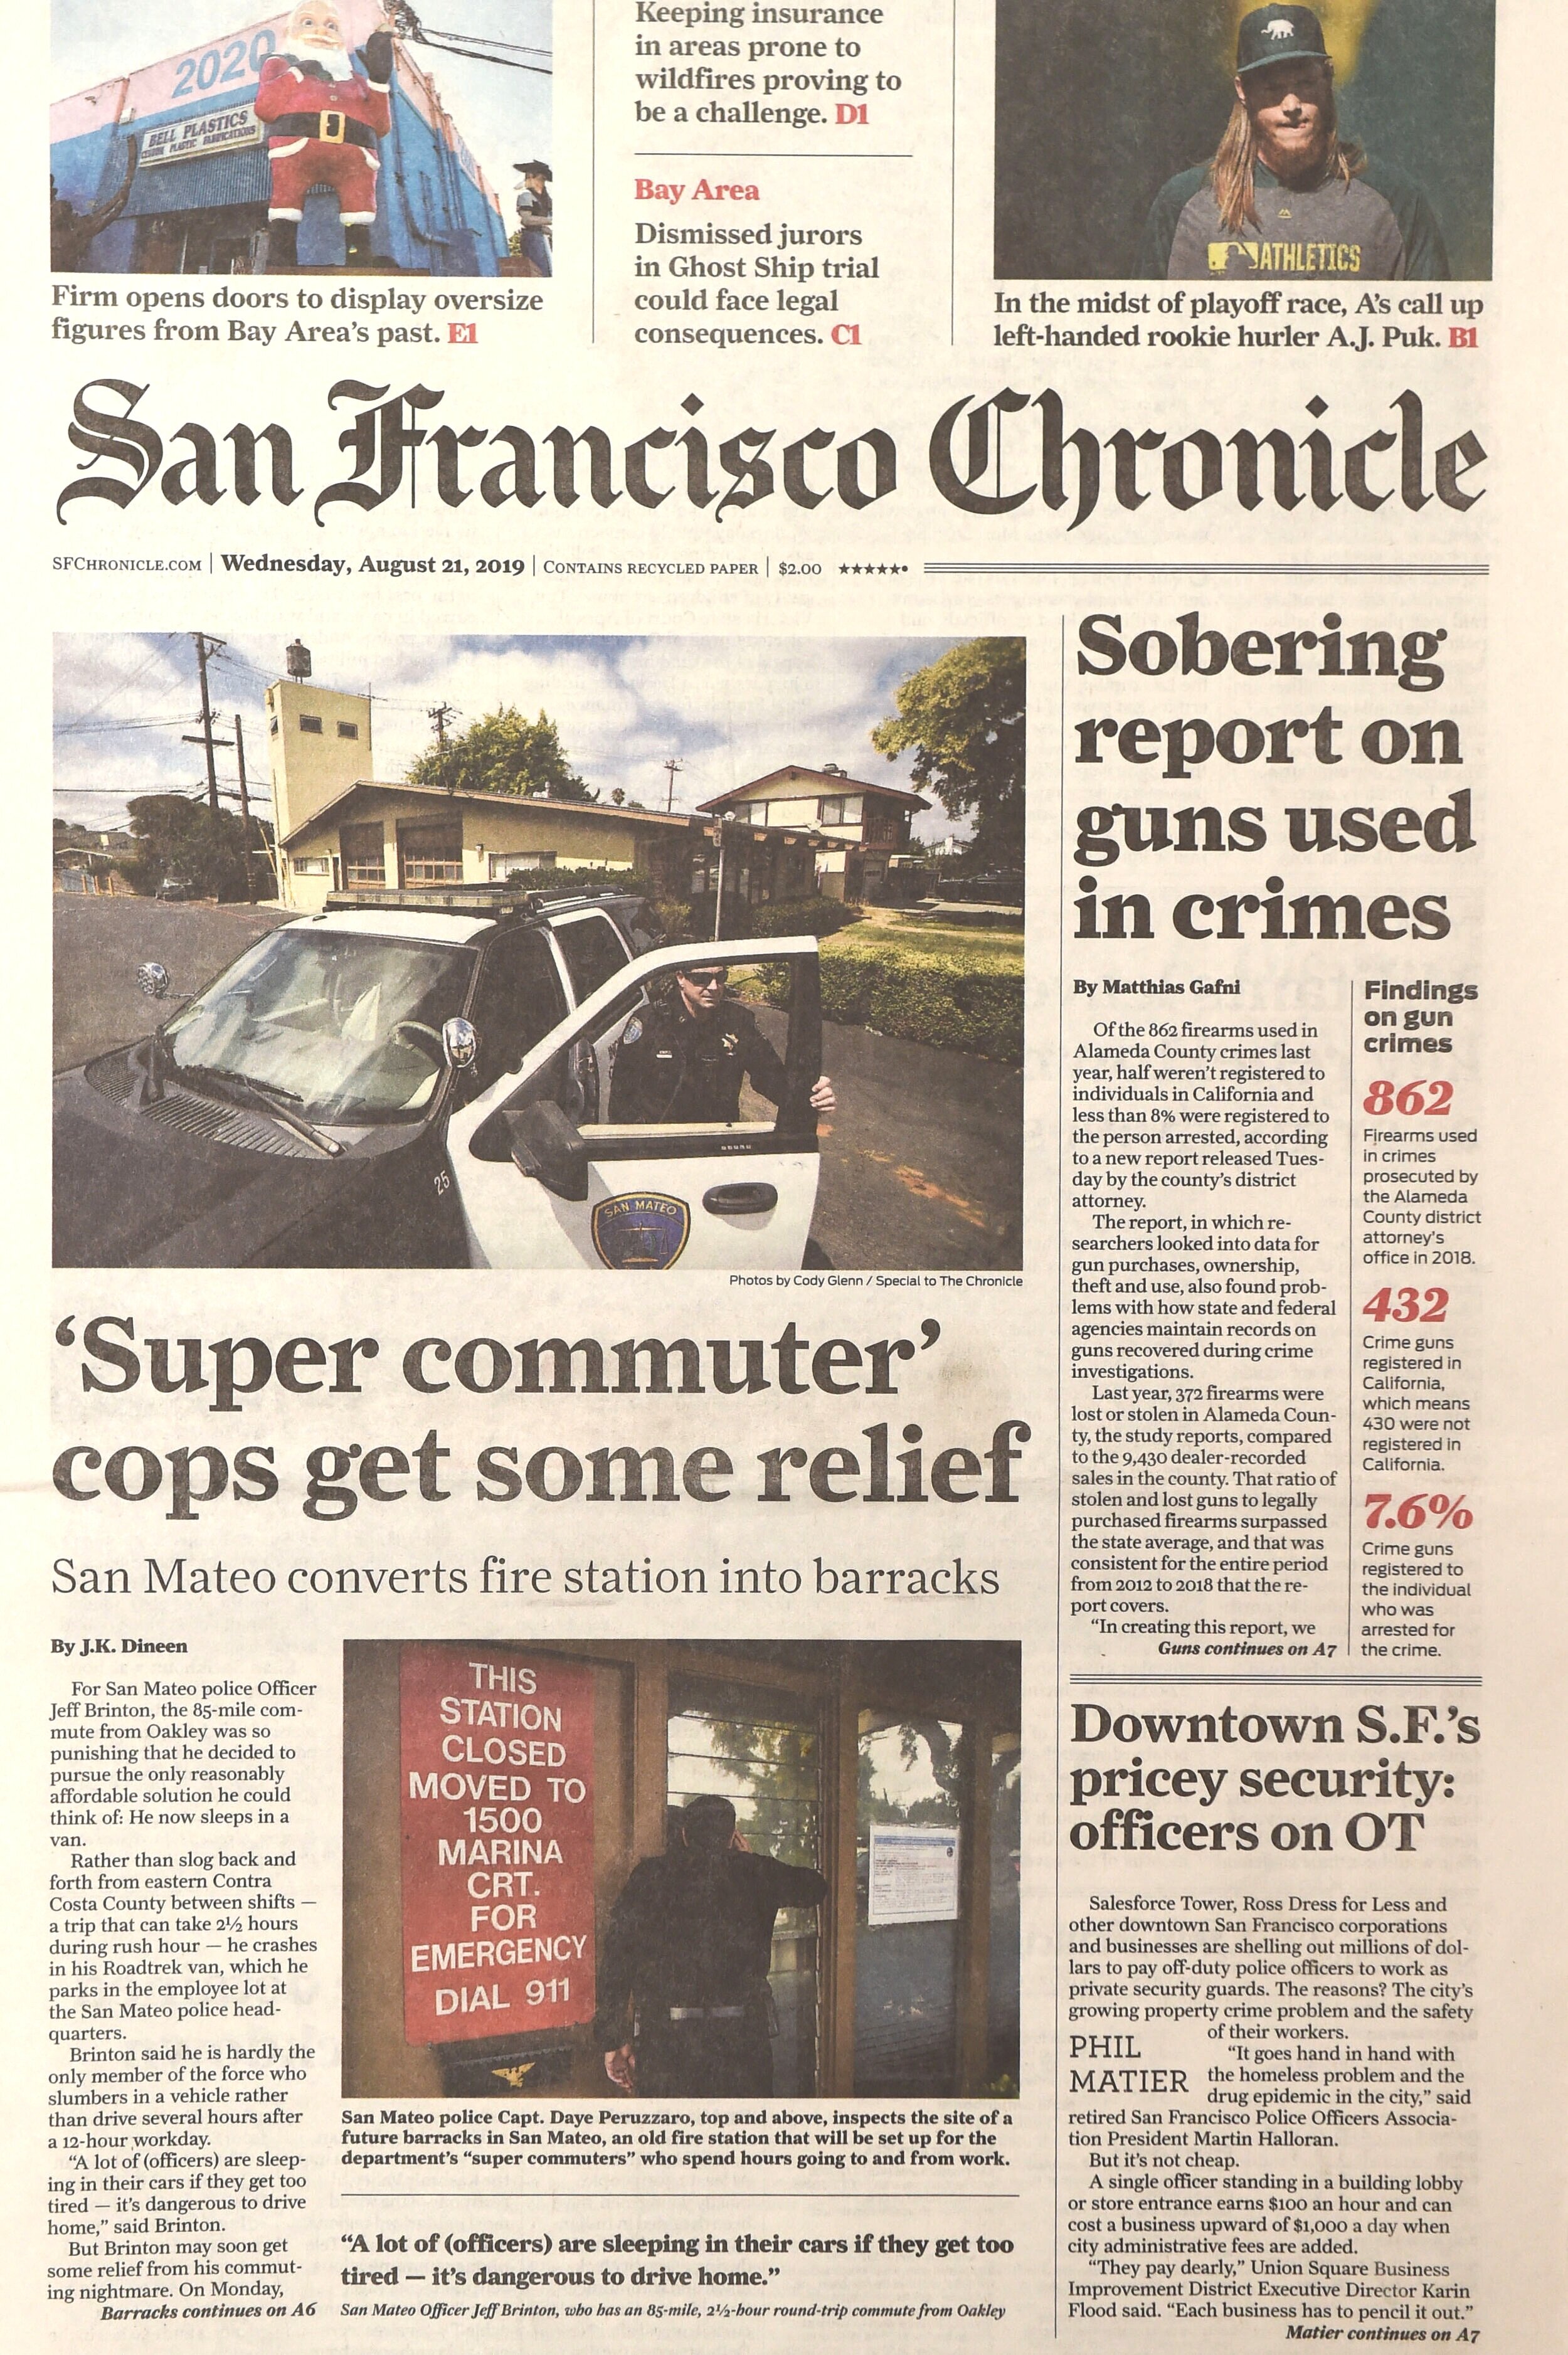  Police bunk at former firehouse in San Mateo California because of long commutes August 21 2019 /  San Francisco Chronicle  